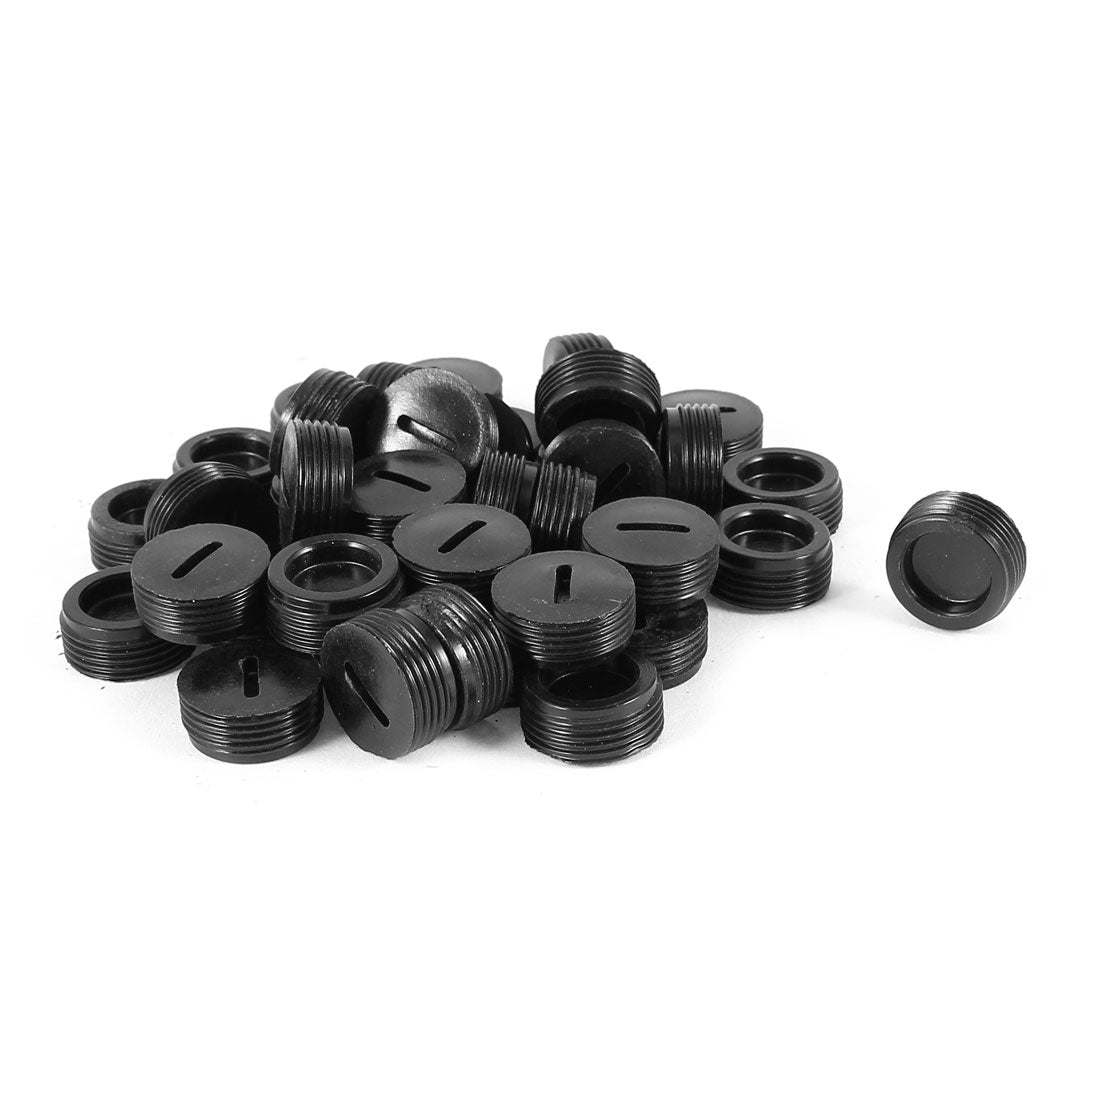 uxcell Uxcell 40 Pcs 15mm Dia External Thread Slotted Top Plastic Motor Carbon Brush Holder Cap Cover Black